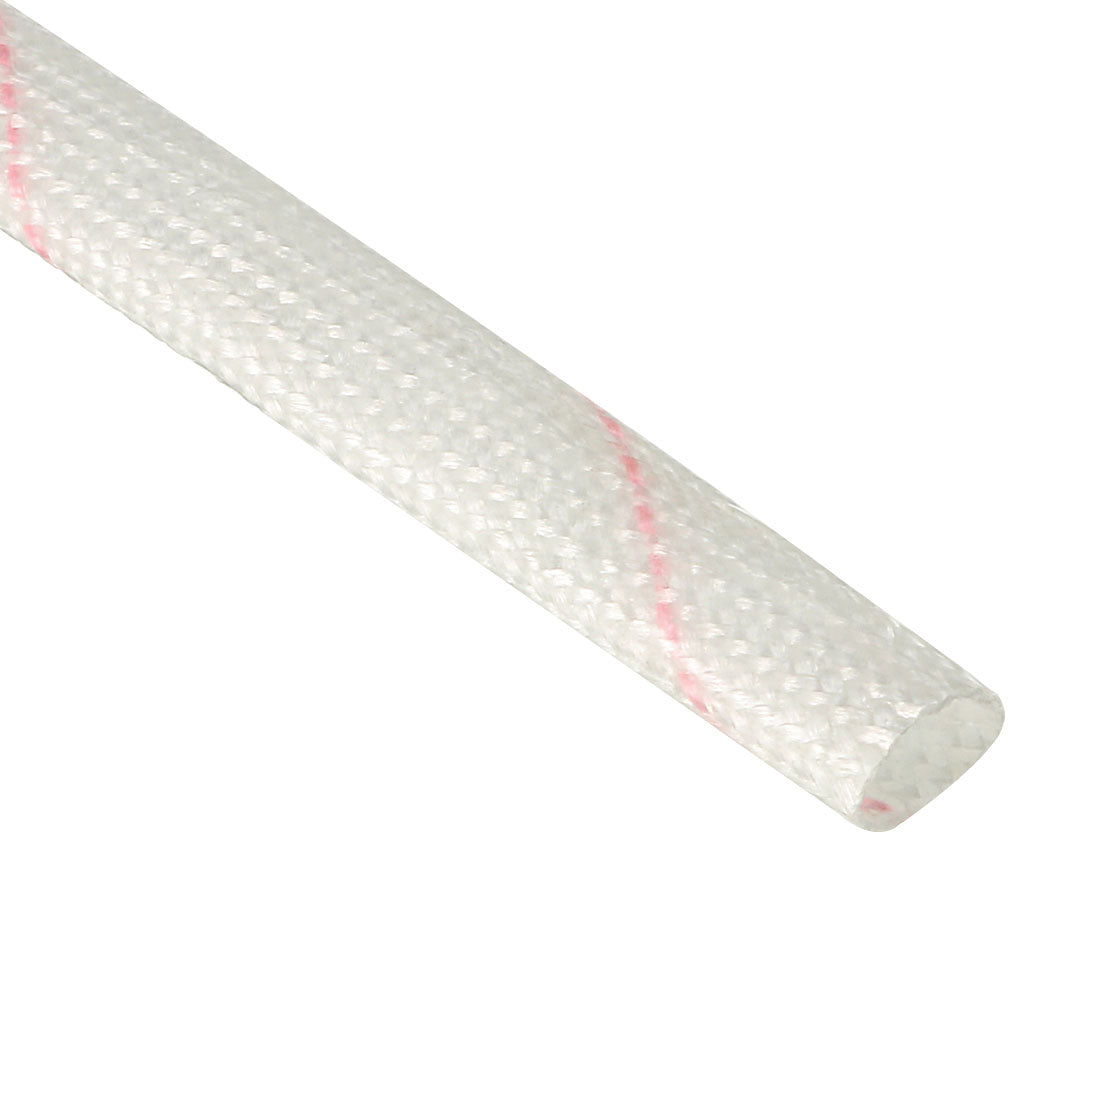 uxcell Uxcell Fiberglass Sleeve 8mm I.D. PVC Insulation Tubing 1500V Tube Adjustable Sleeving Pipe 125 Degree Centigrade Cable Wrap Wire 880mm 3.28ft White and Red